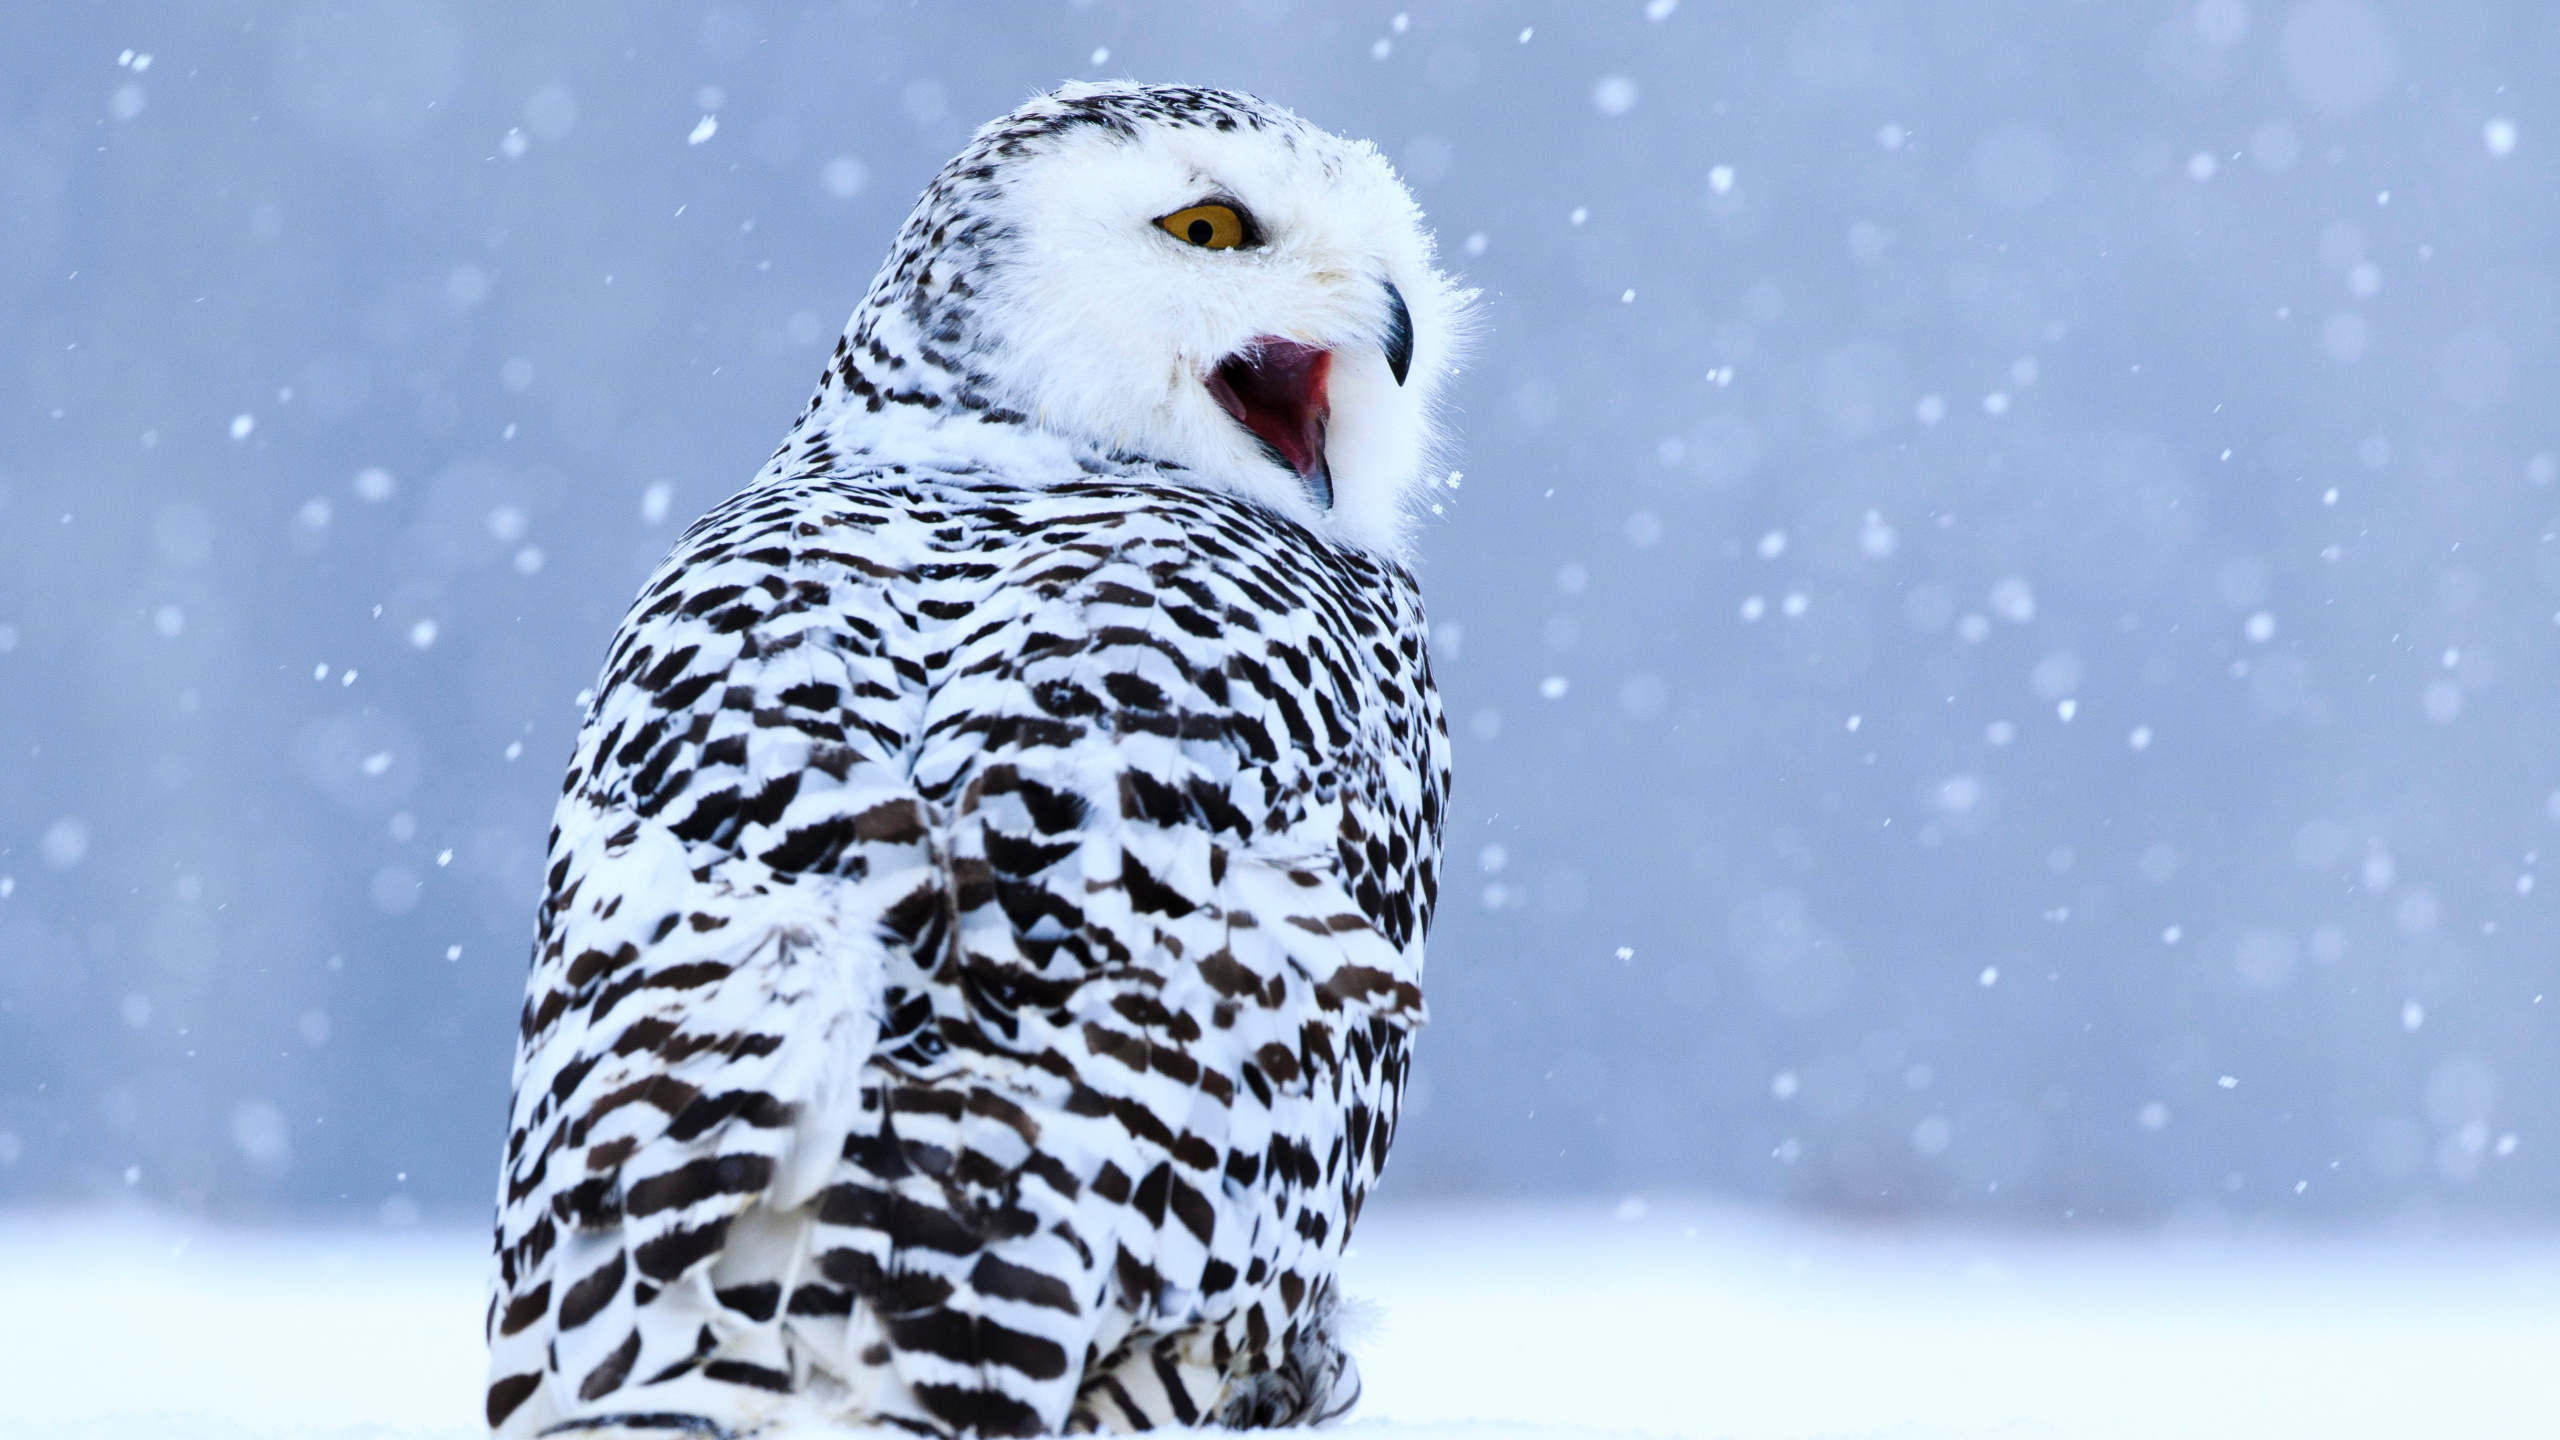 White and Black Owl on Snow Covered Ground During Daytime. Wallpaper in 2560x1440 Resolution